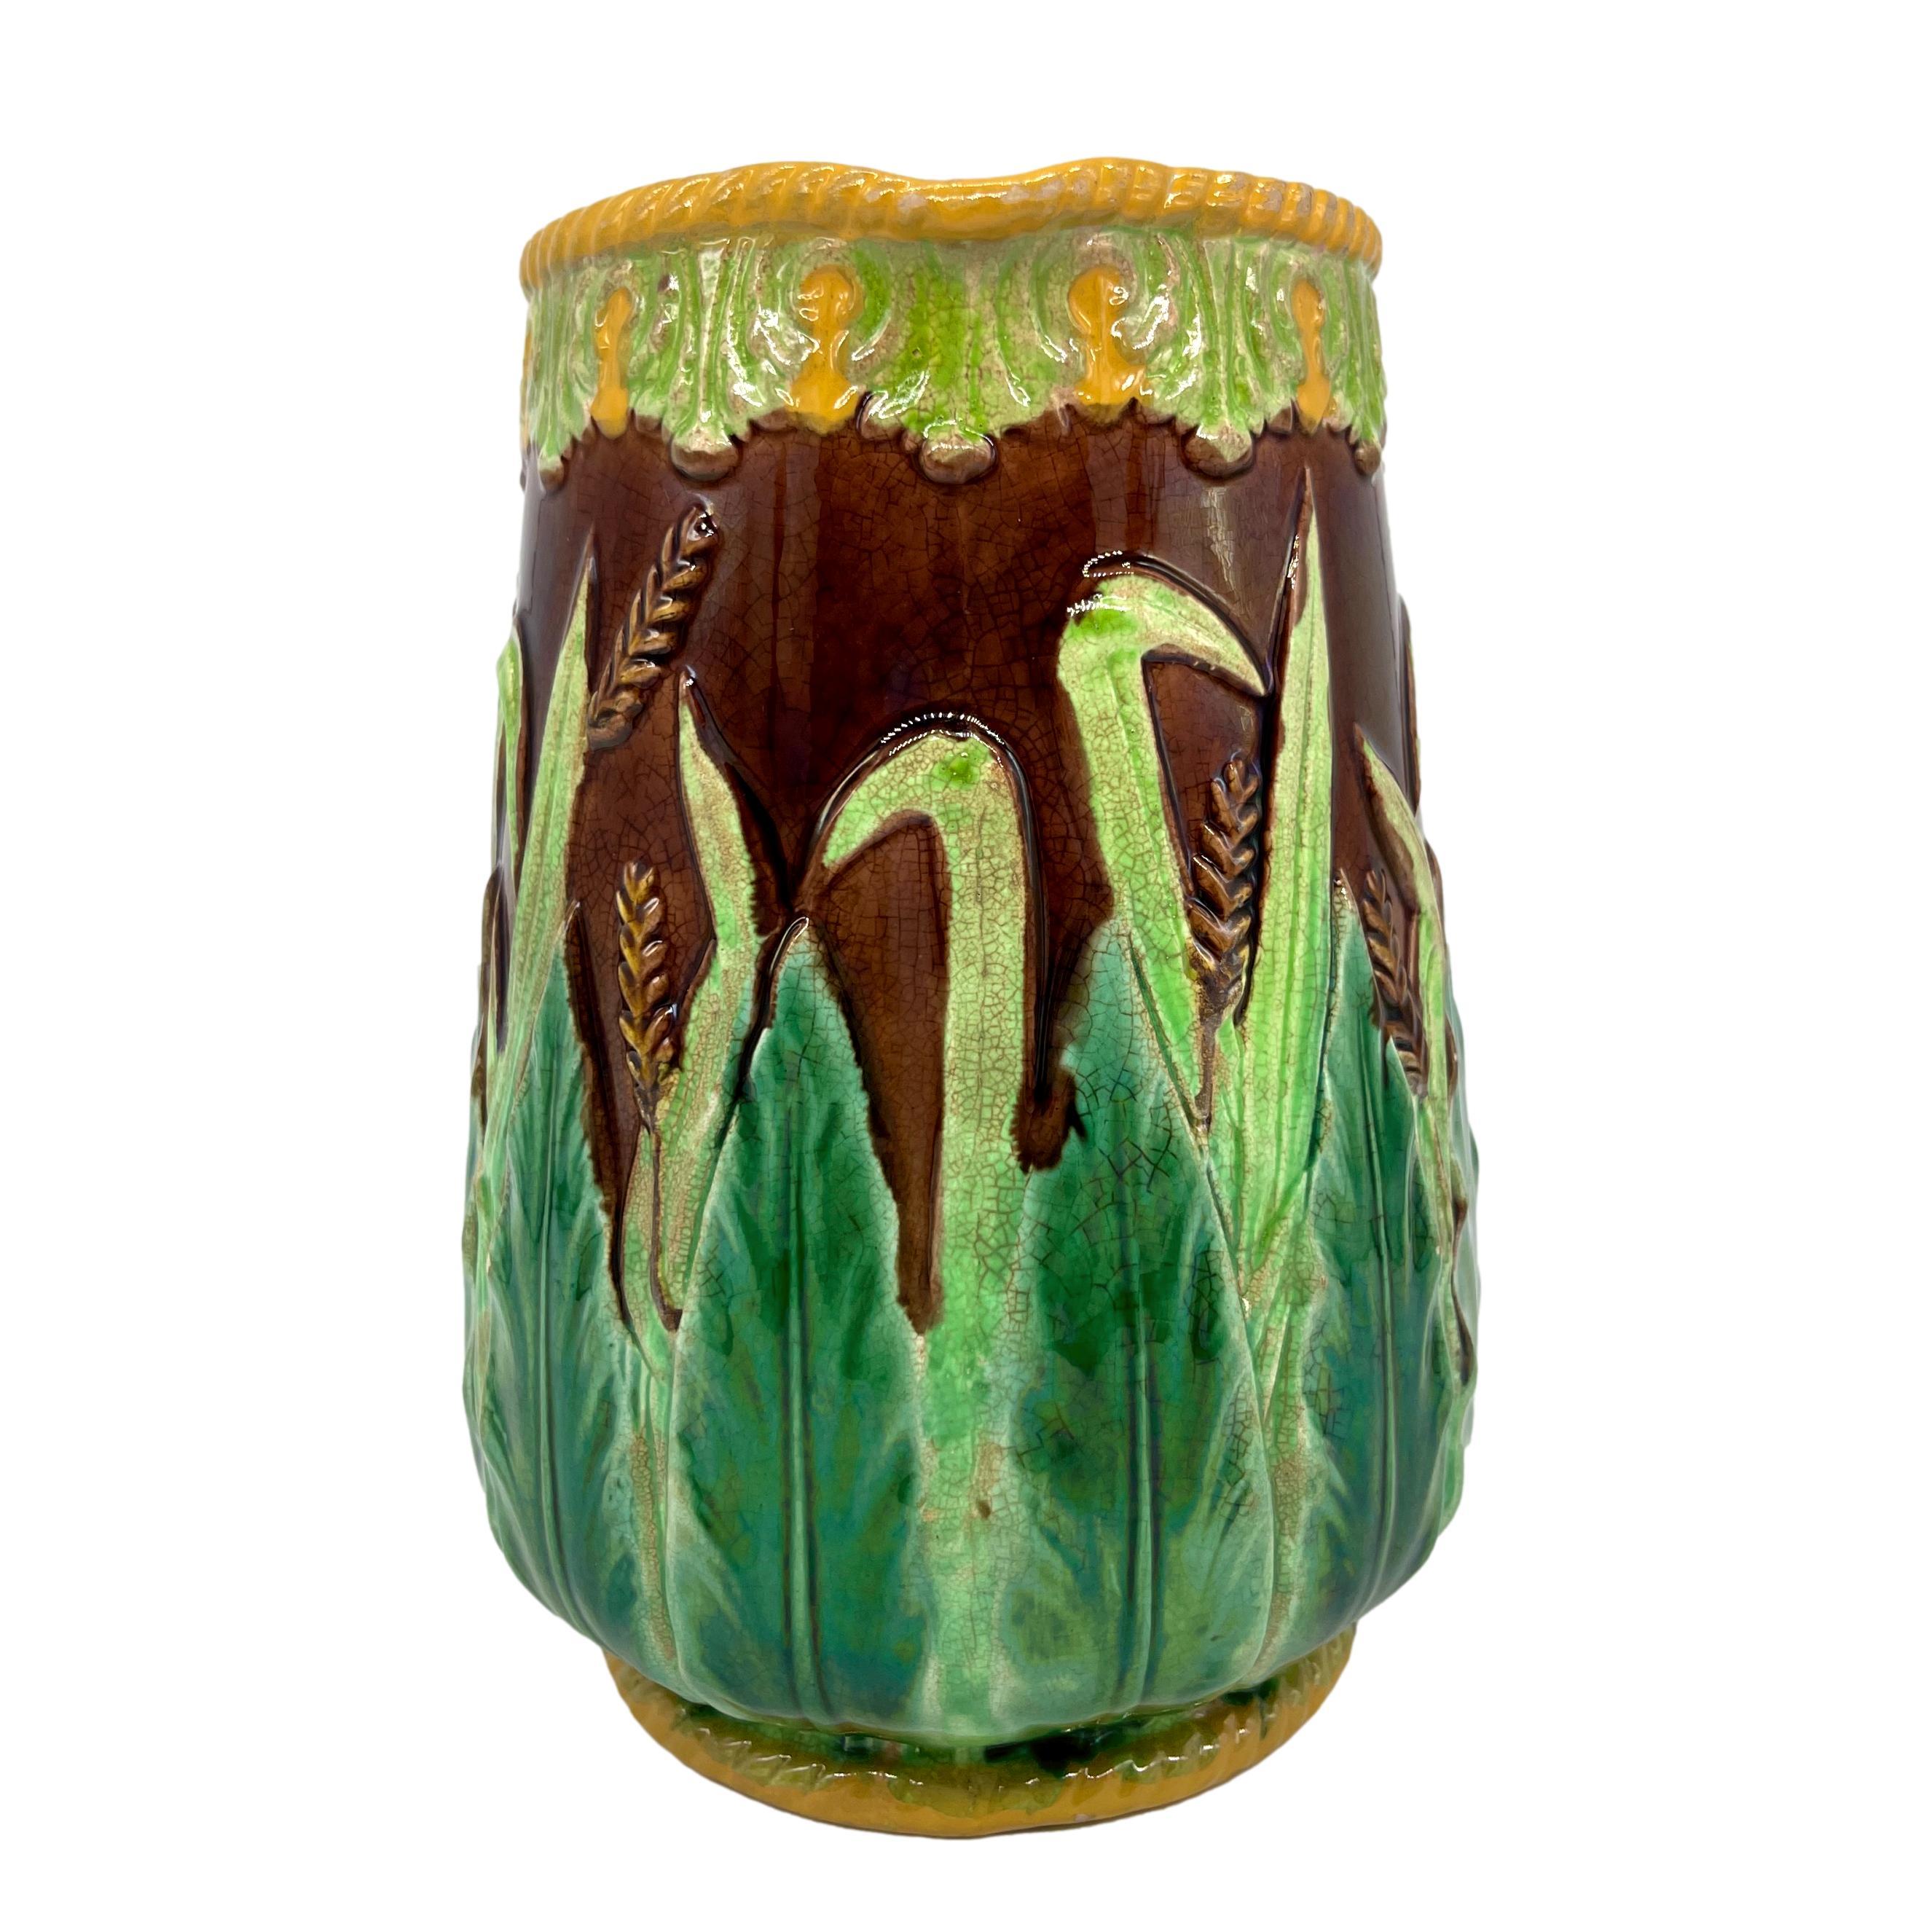 English George Jones Majolica Wheat Pitcher with Green Acanthus Leaves, Ca. 1875 For Sale